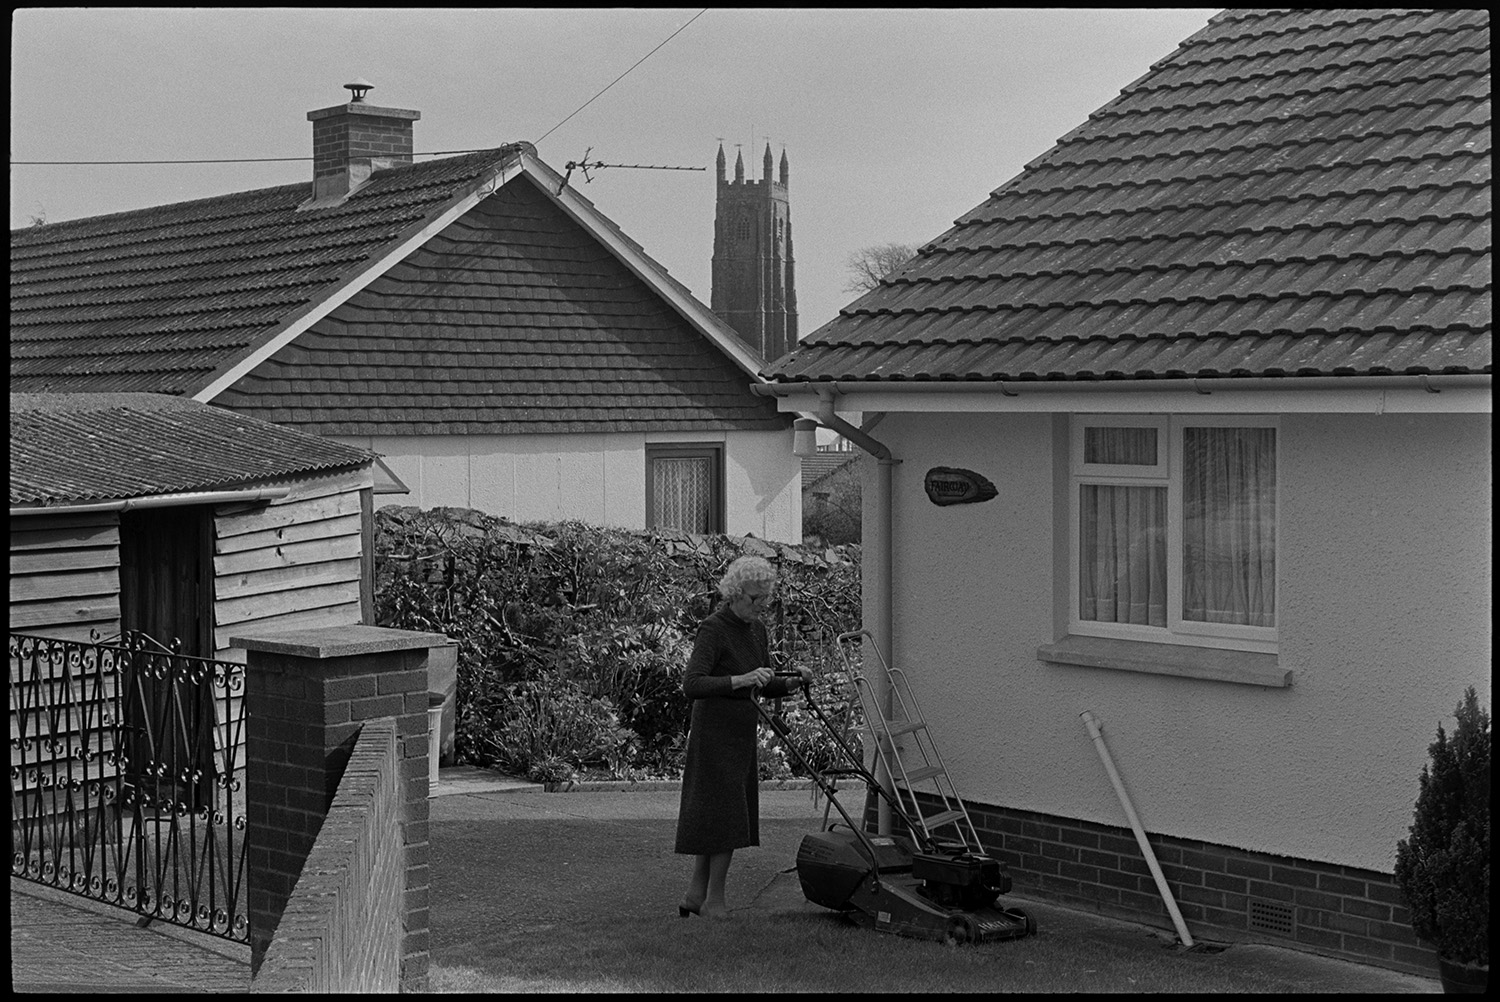 Street scenes, public bench.
[A woman mowing her lawn in the garden of a bungalow in Chulmleigh. There is a garden shed, wrought iron gates and garden plants in front of a wall. Another bungalow is next door, with the tower of Chulmleigh church in the background.]